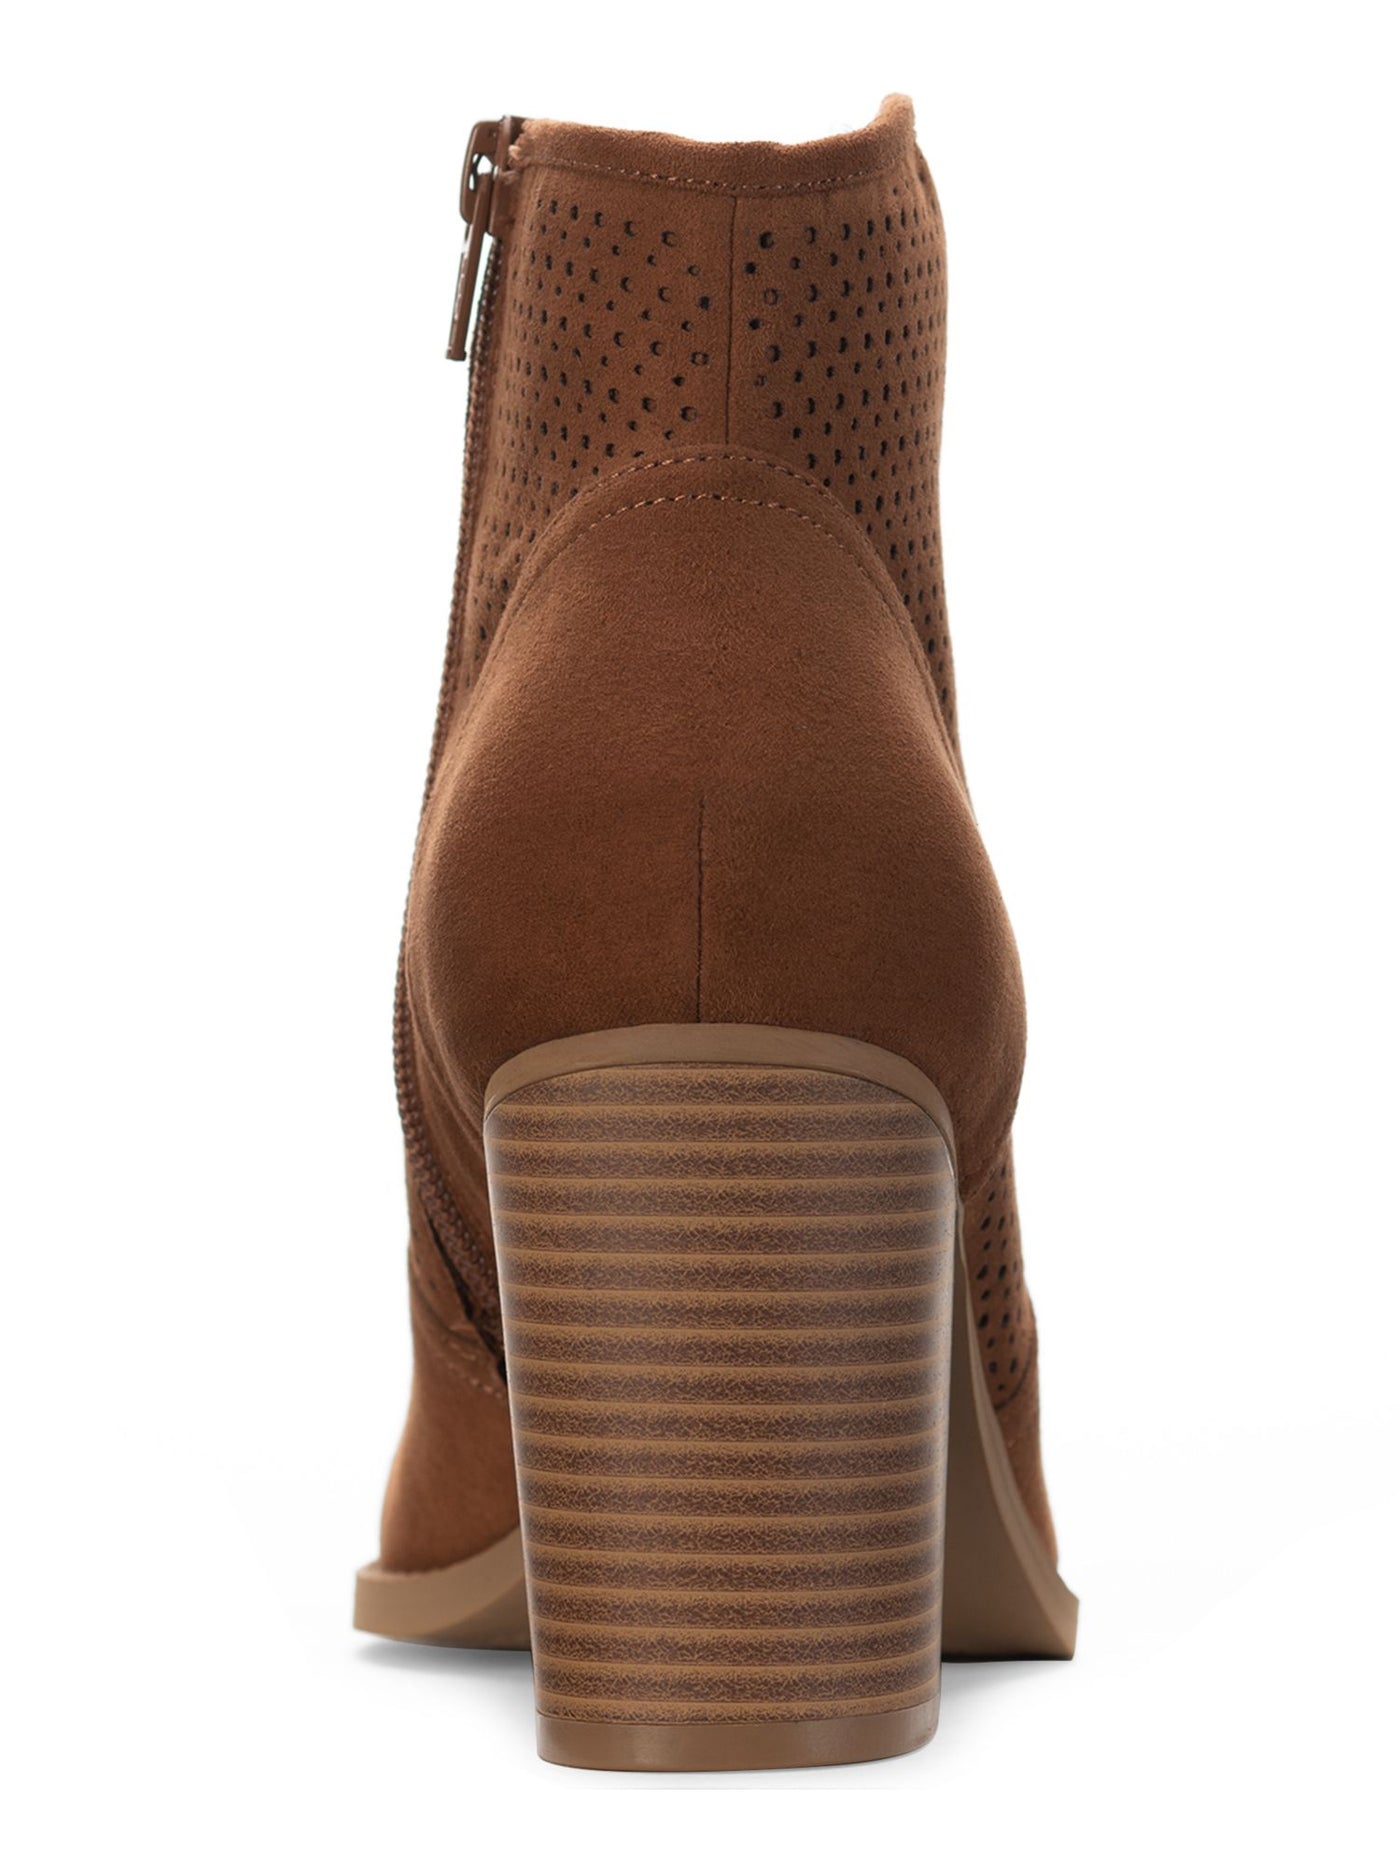 SUN STONE Womens Brown Cushioned Perforated Adrien Perfed Almond Toe Block Heel Zip-Up Booties M